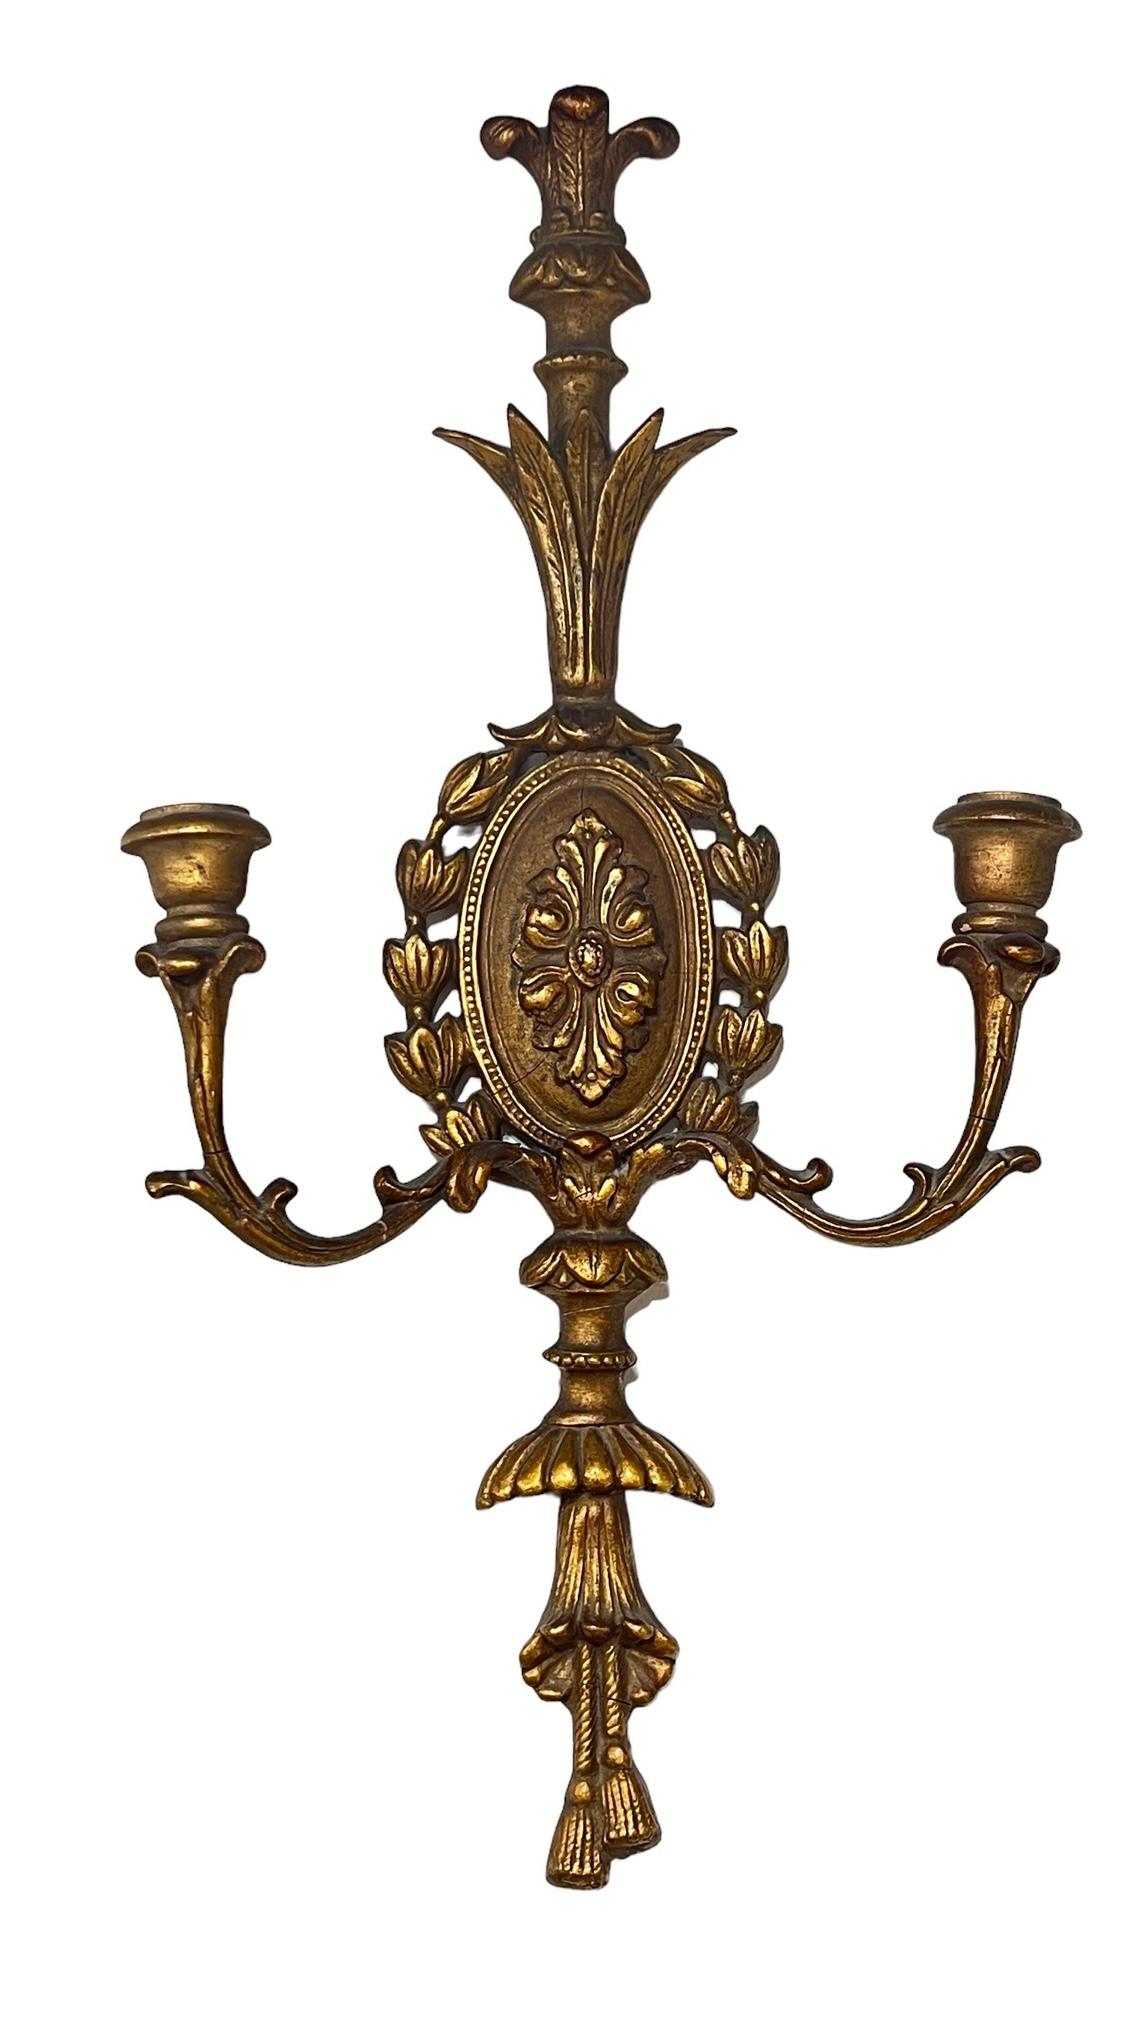 Pair of antique Italian carved giltwood wall lights in the neoclassicals style.